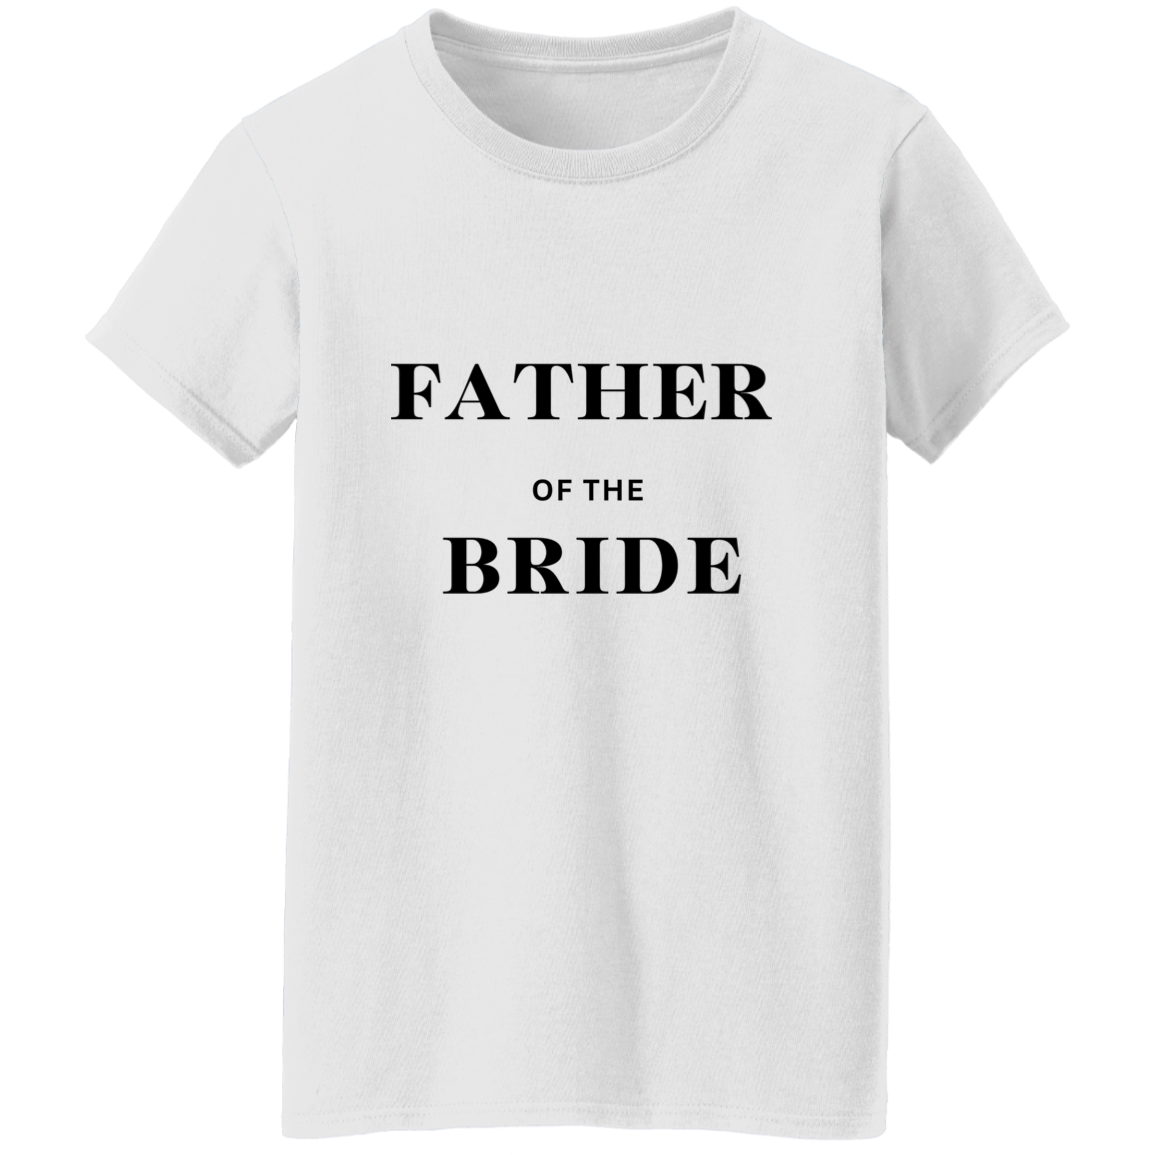 Father Of The Bride ~T-Shirt